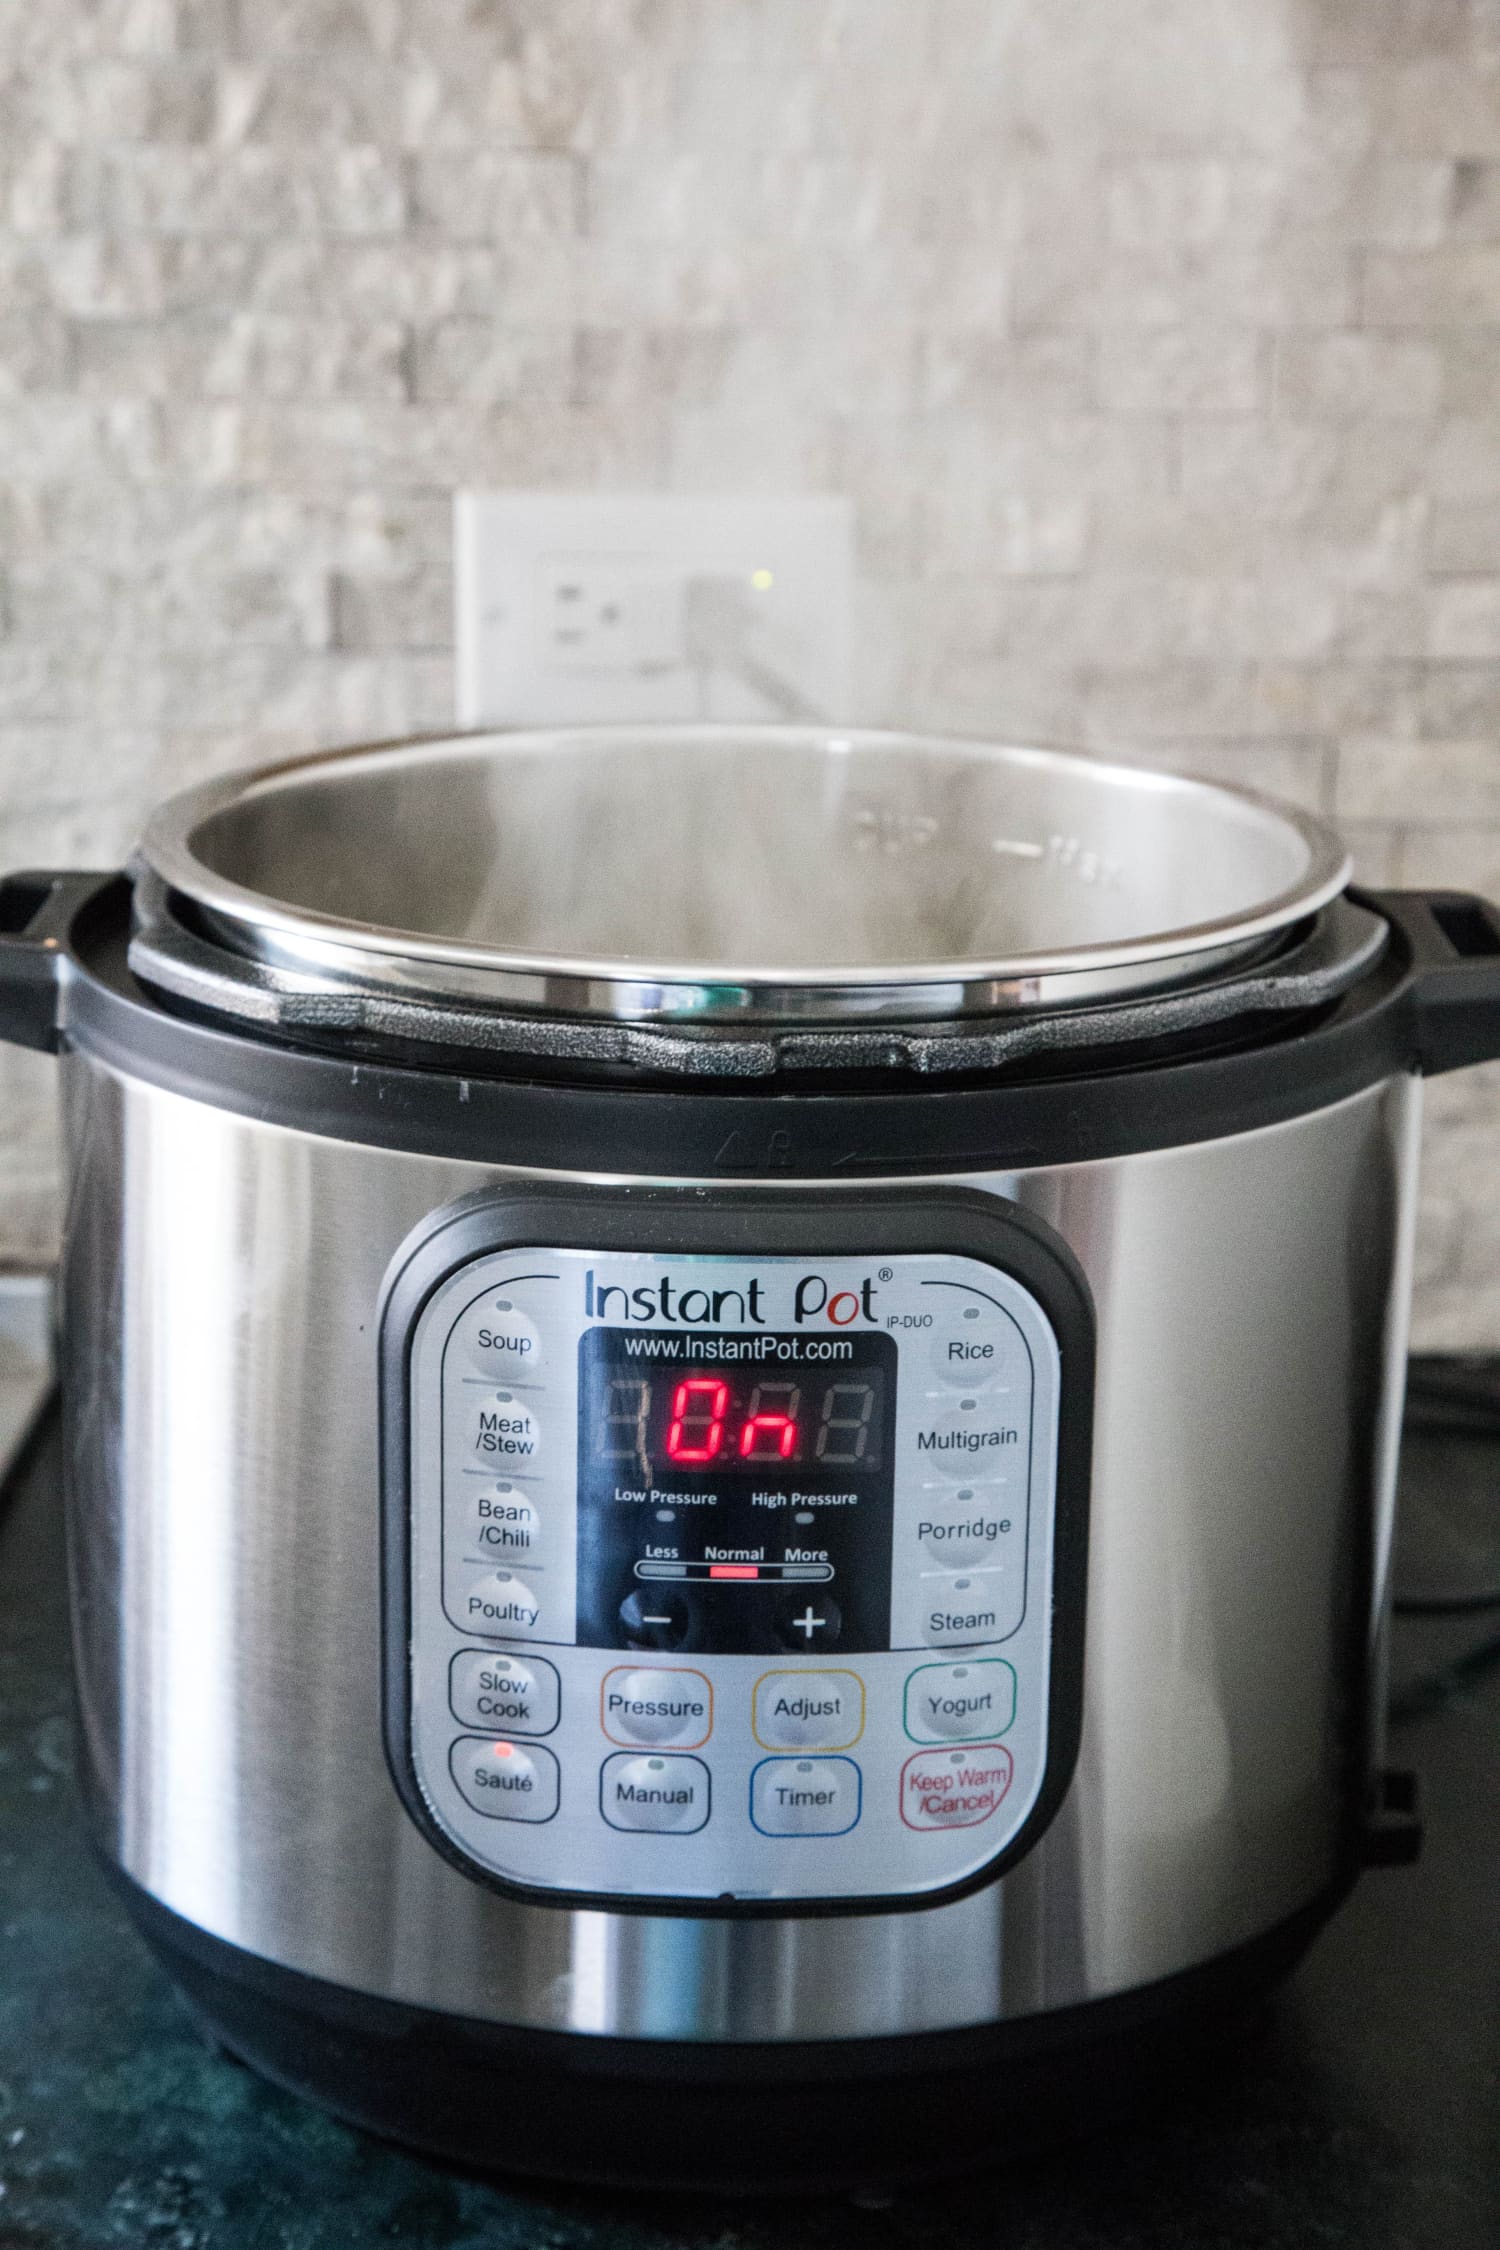 Instant Pot Product Review | Kitchn